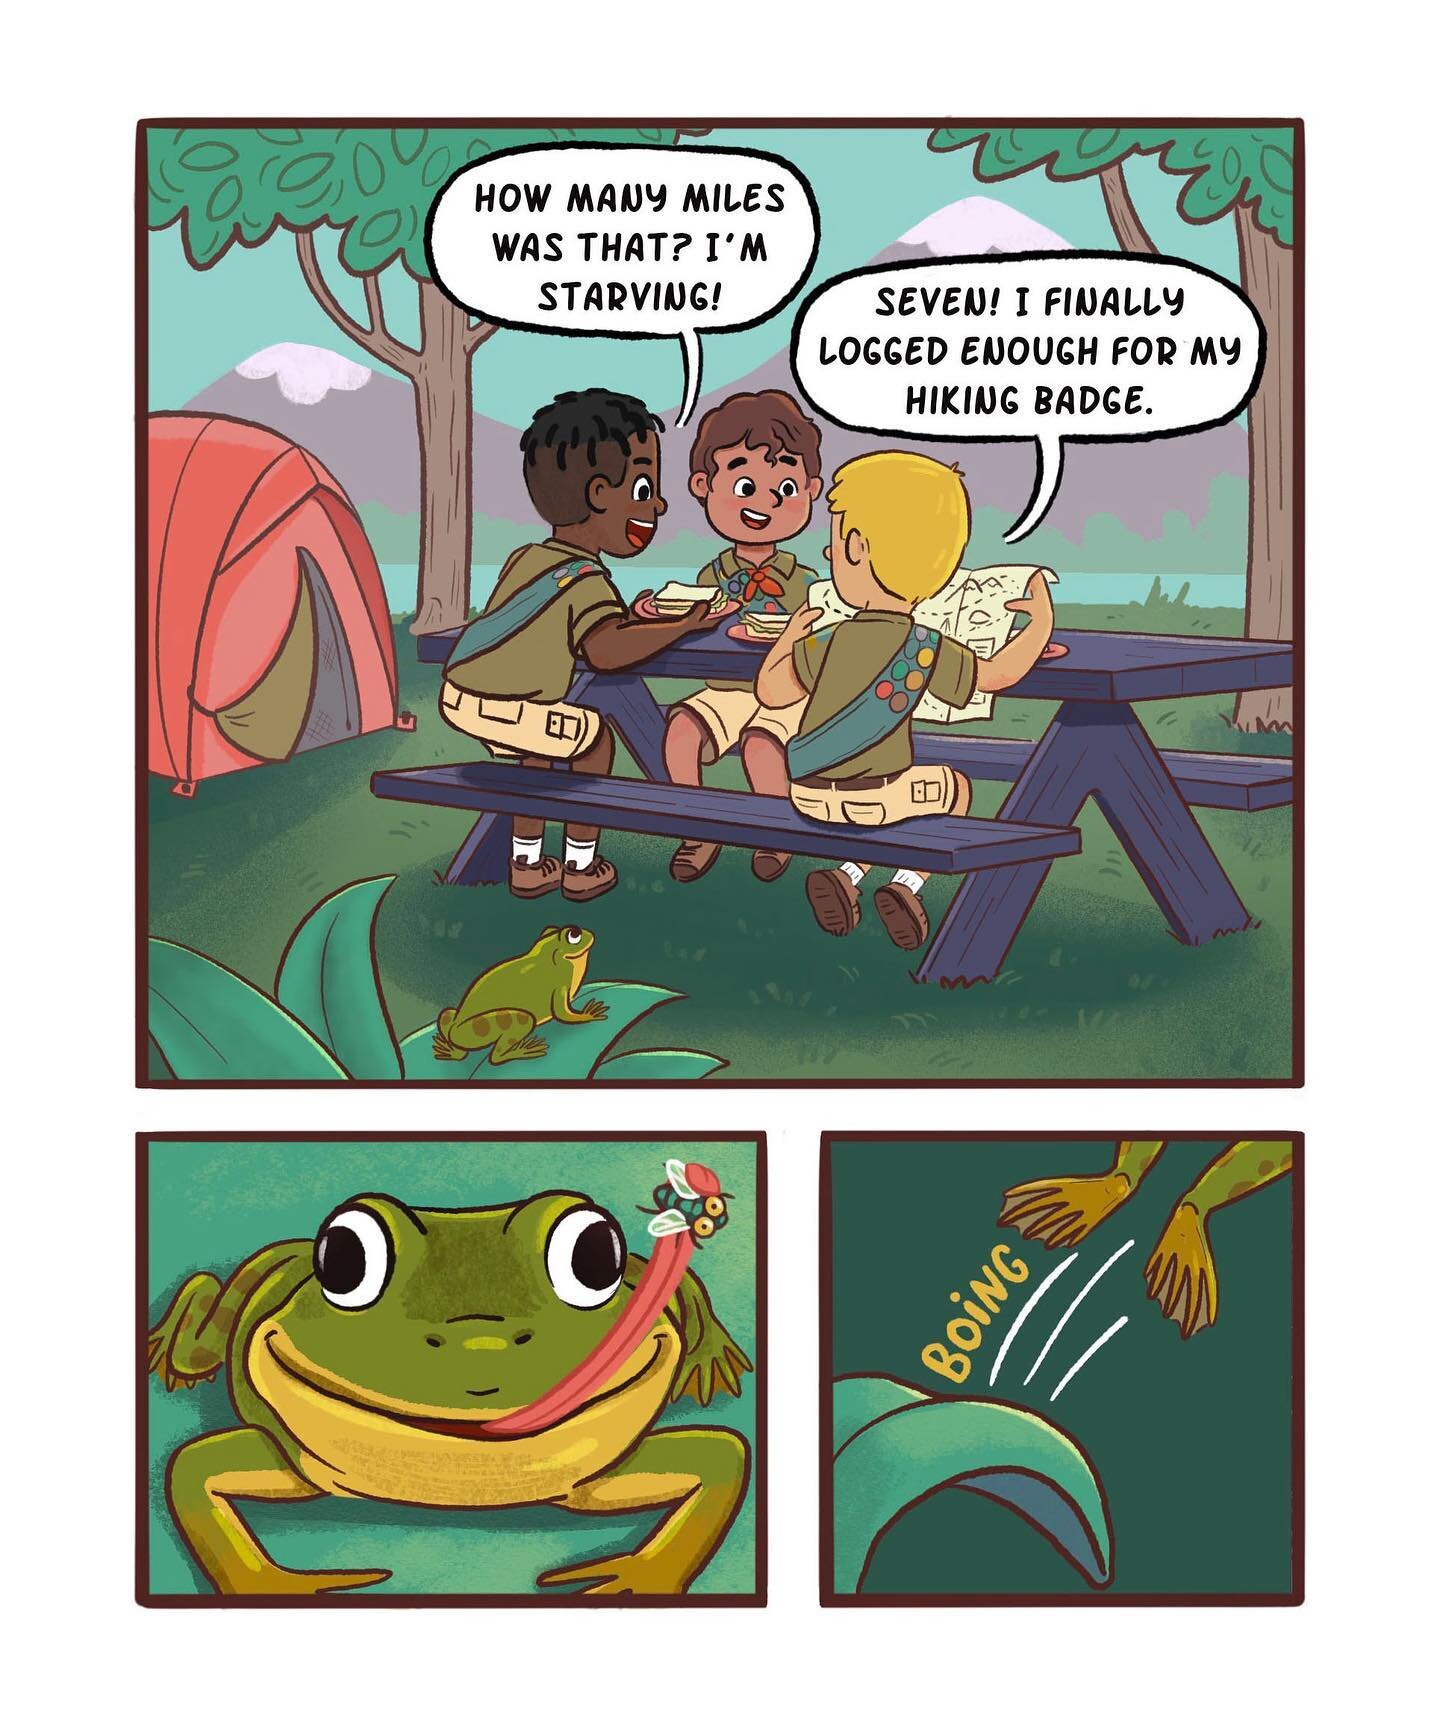 And here&rsquo;s the full scene 🐸 
Created for the @the_t2_agency prompt &ldquo;dining al fresco&rdquo;

#graphicnovel #graphicnovelsforkids #middlegradegraphicnovel #youngreadergraphicnovel #frogillustration #boyscoutillustration #campingillustrati